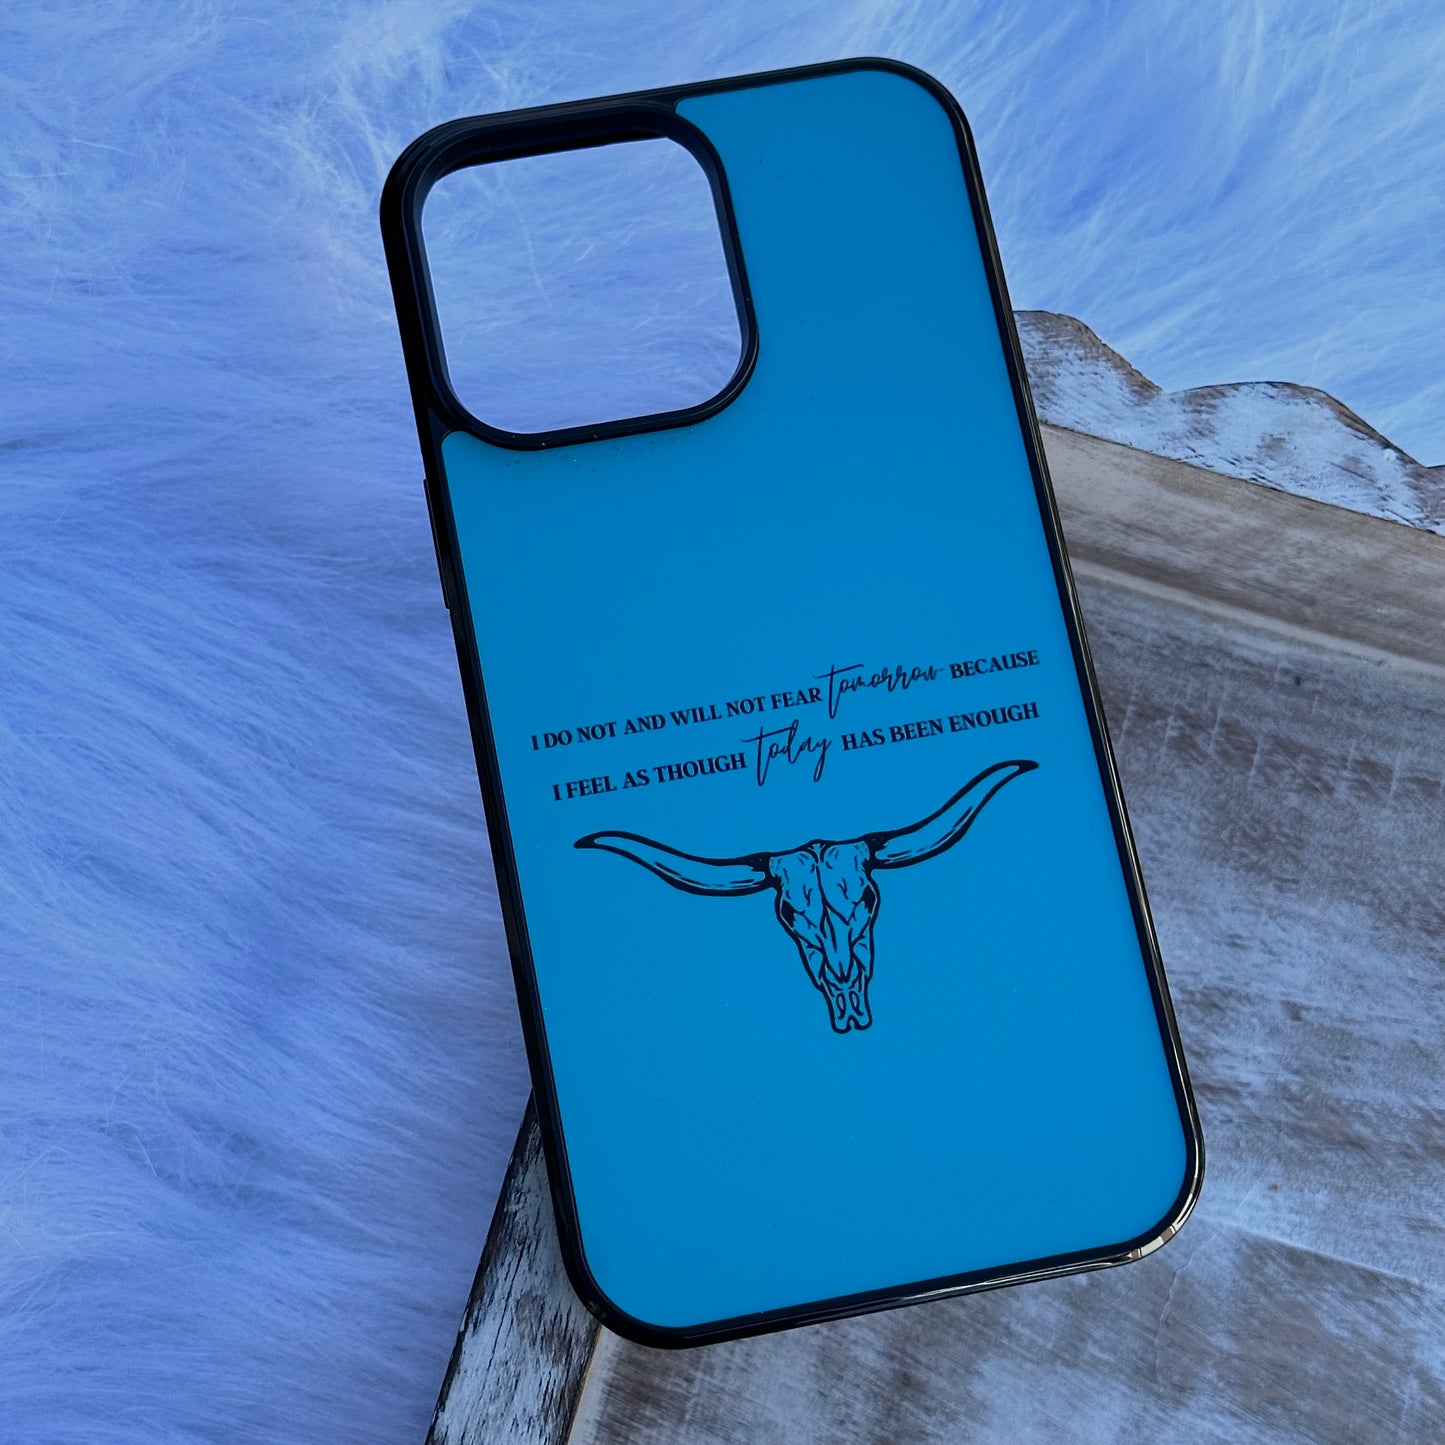 Turquoise FT phone case